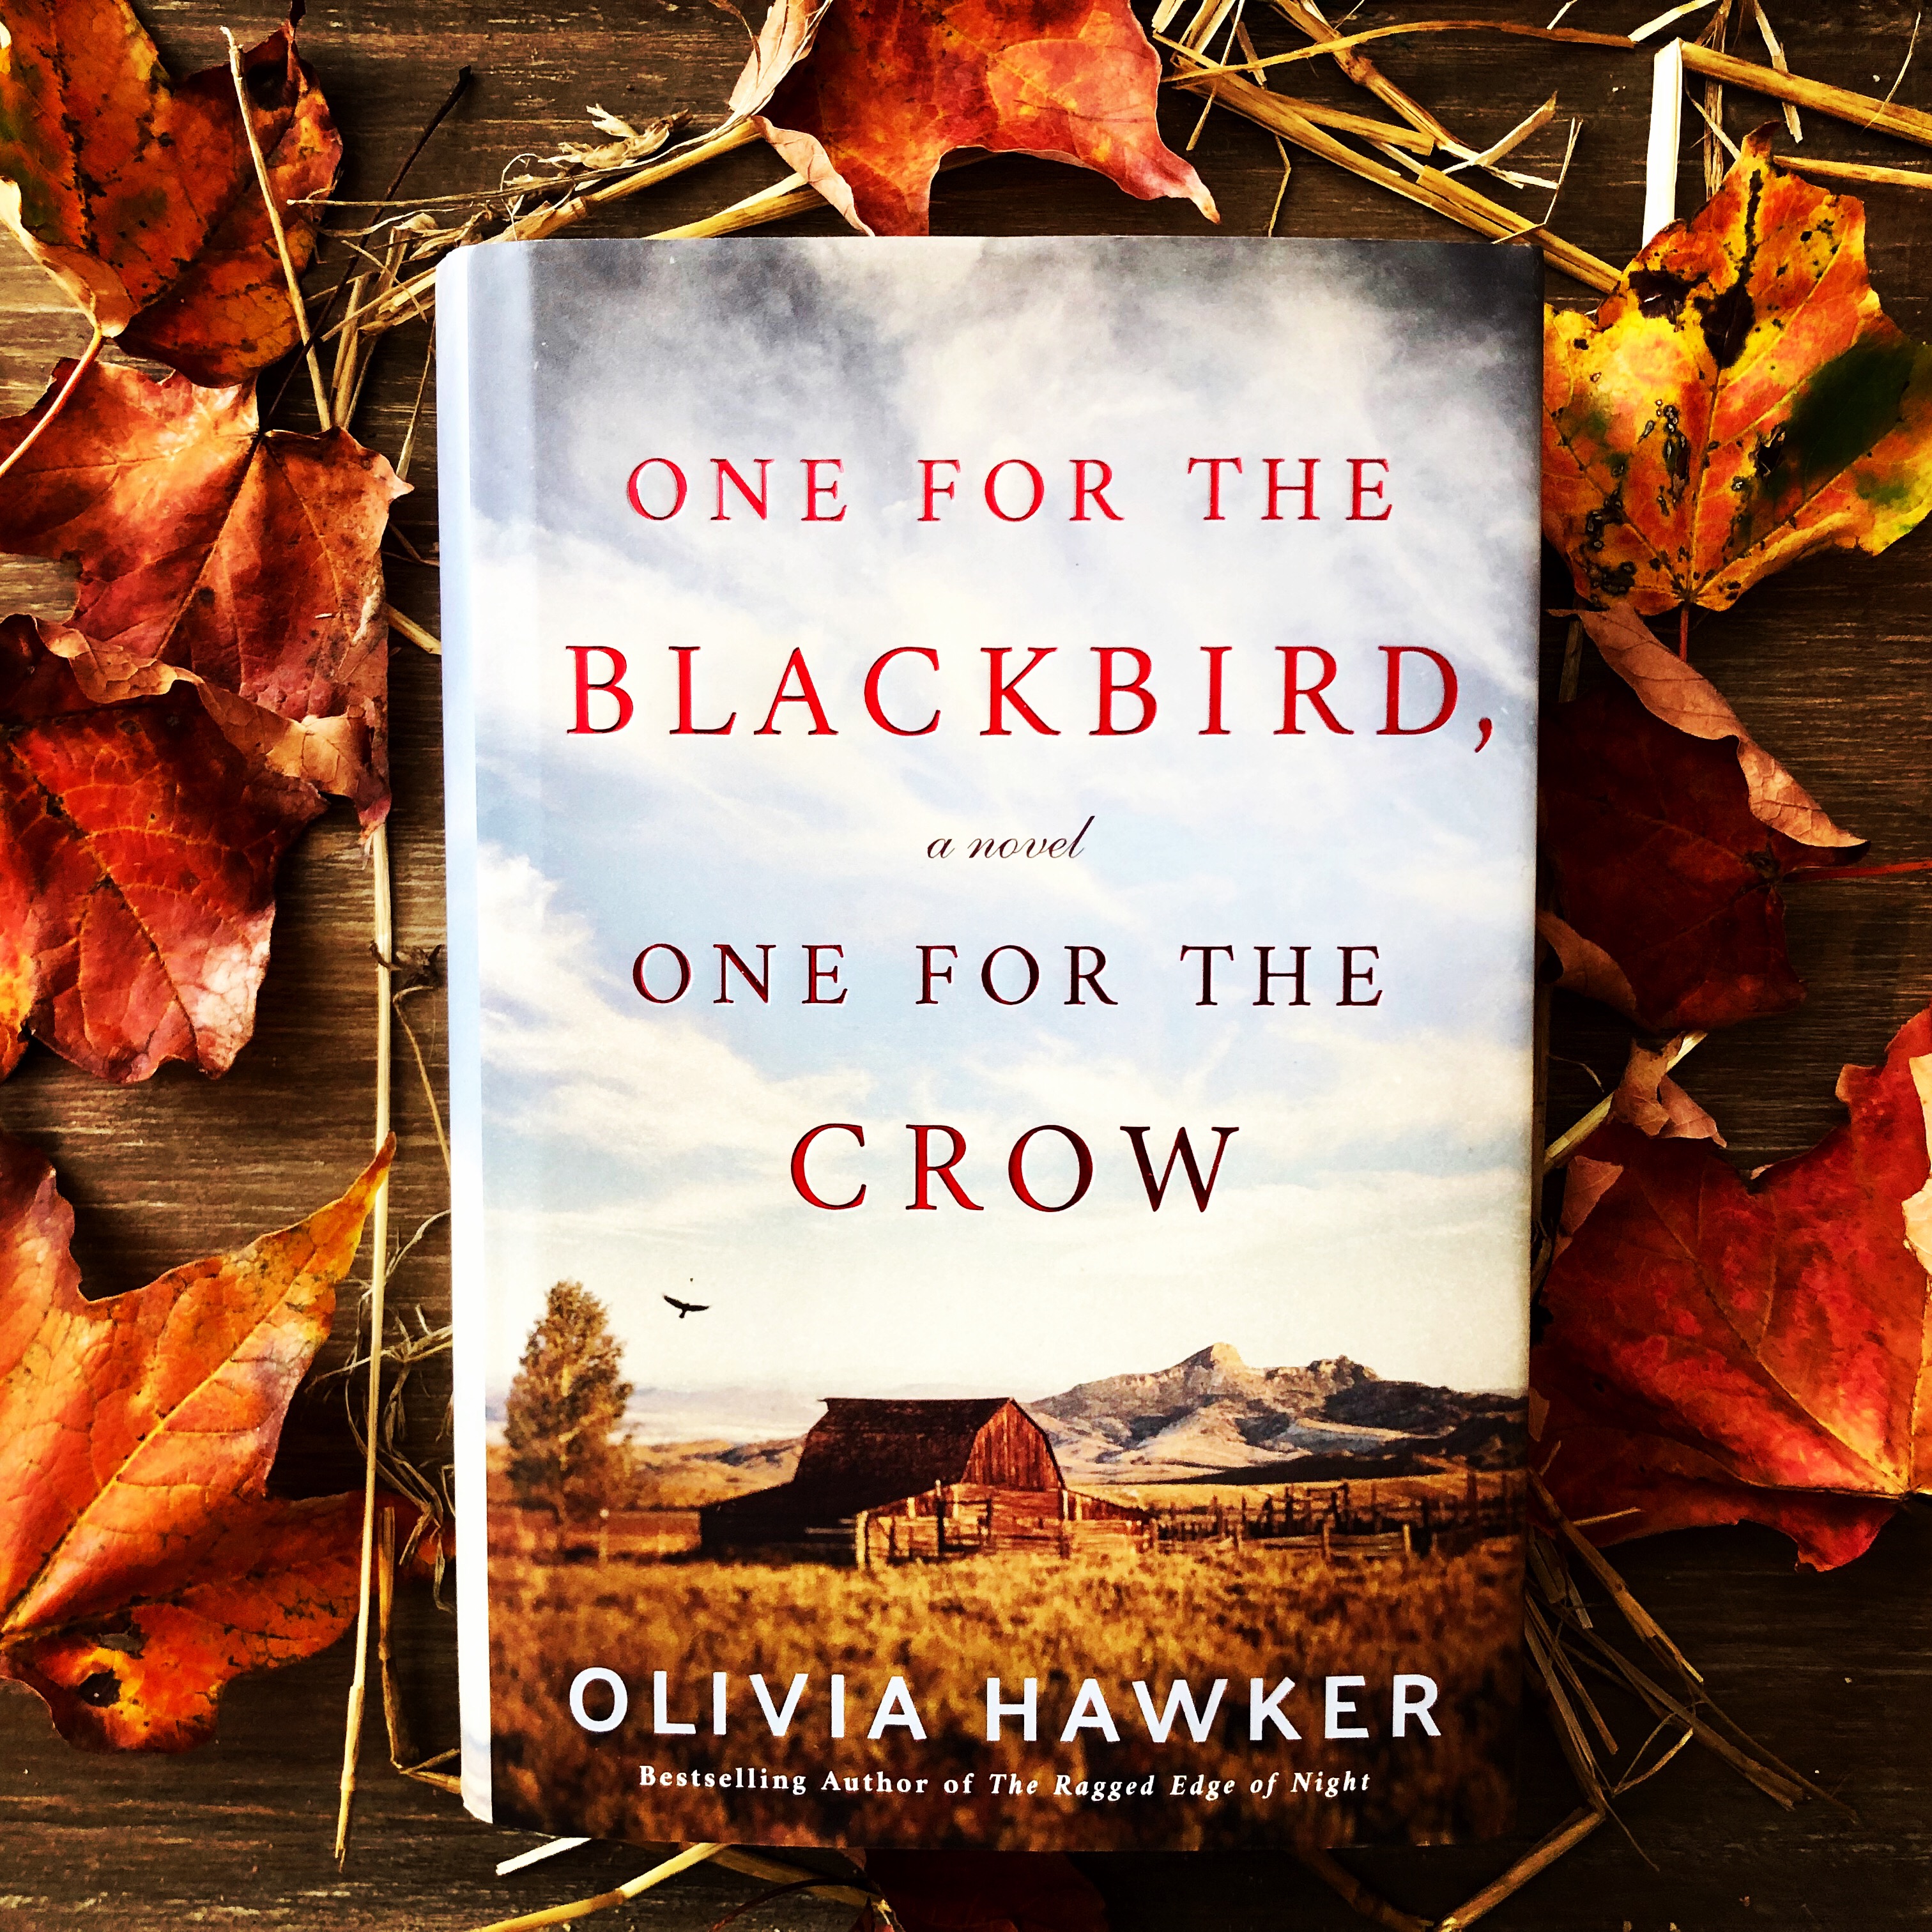 Review: One for the Blackbird, One for the Crow